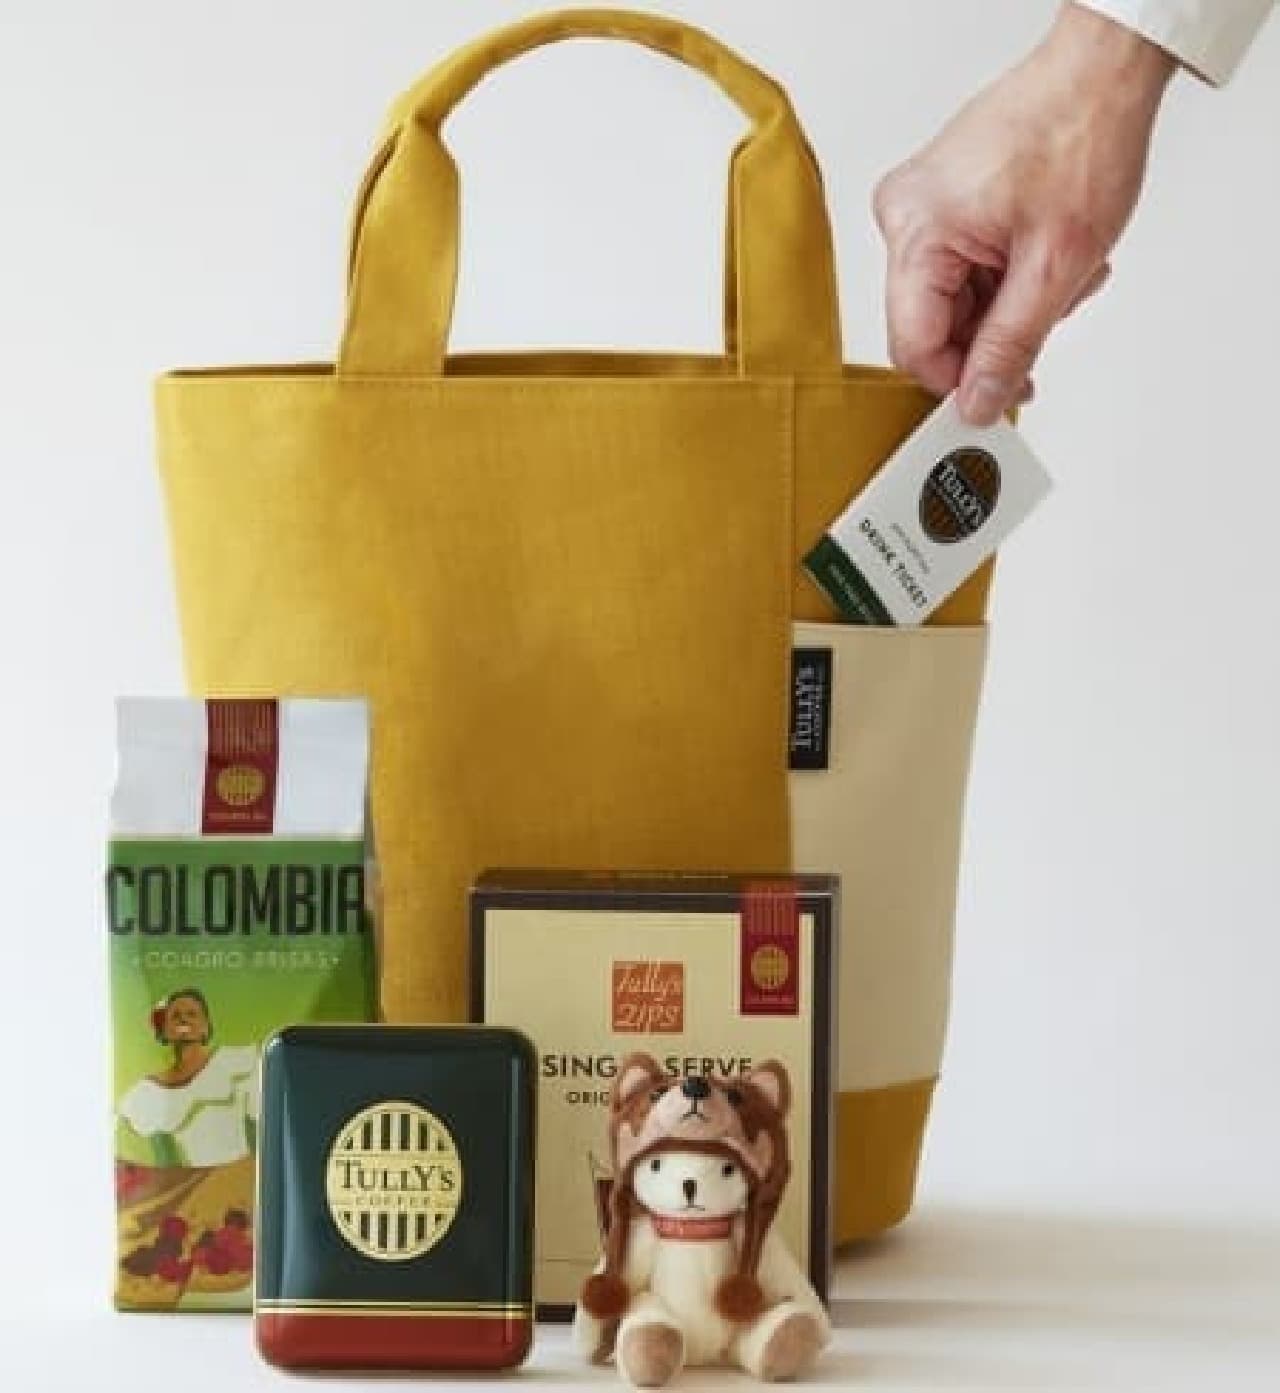 Tully's Coffee "2018 HAPPY BAG"